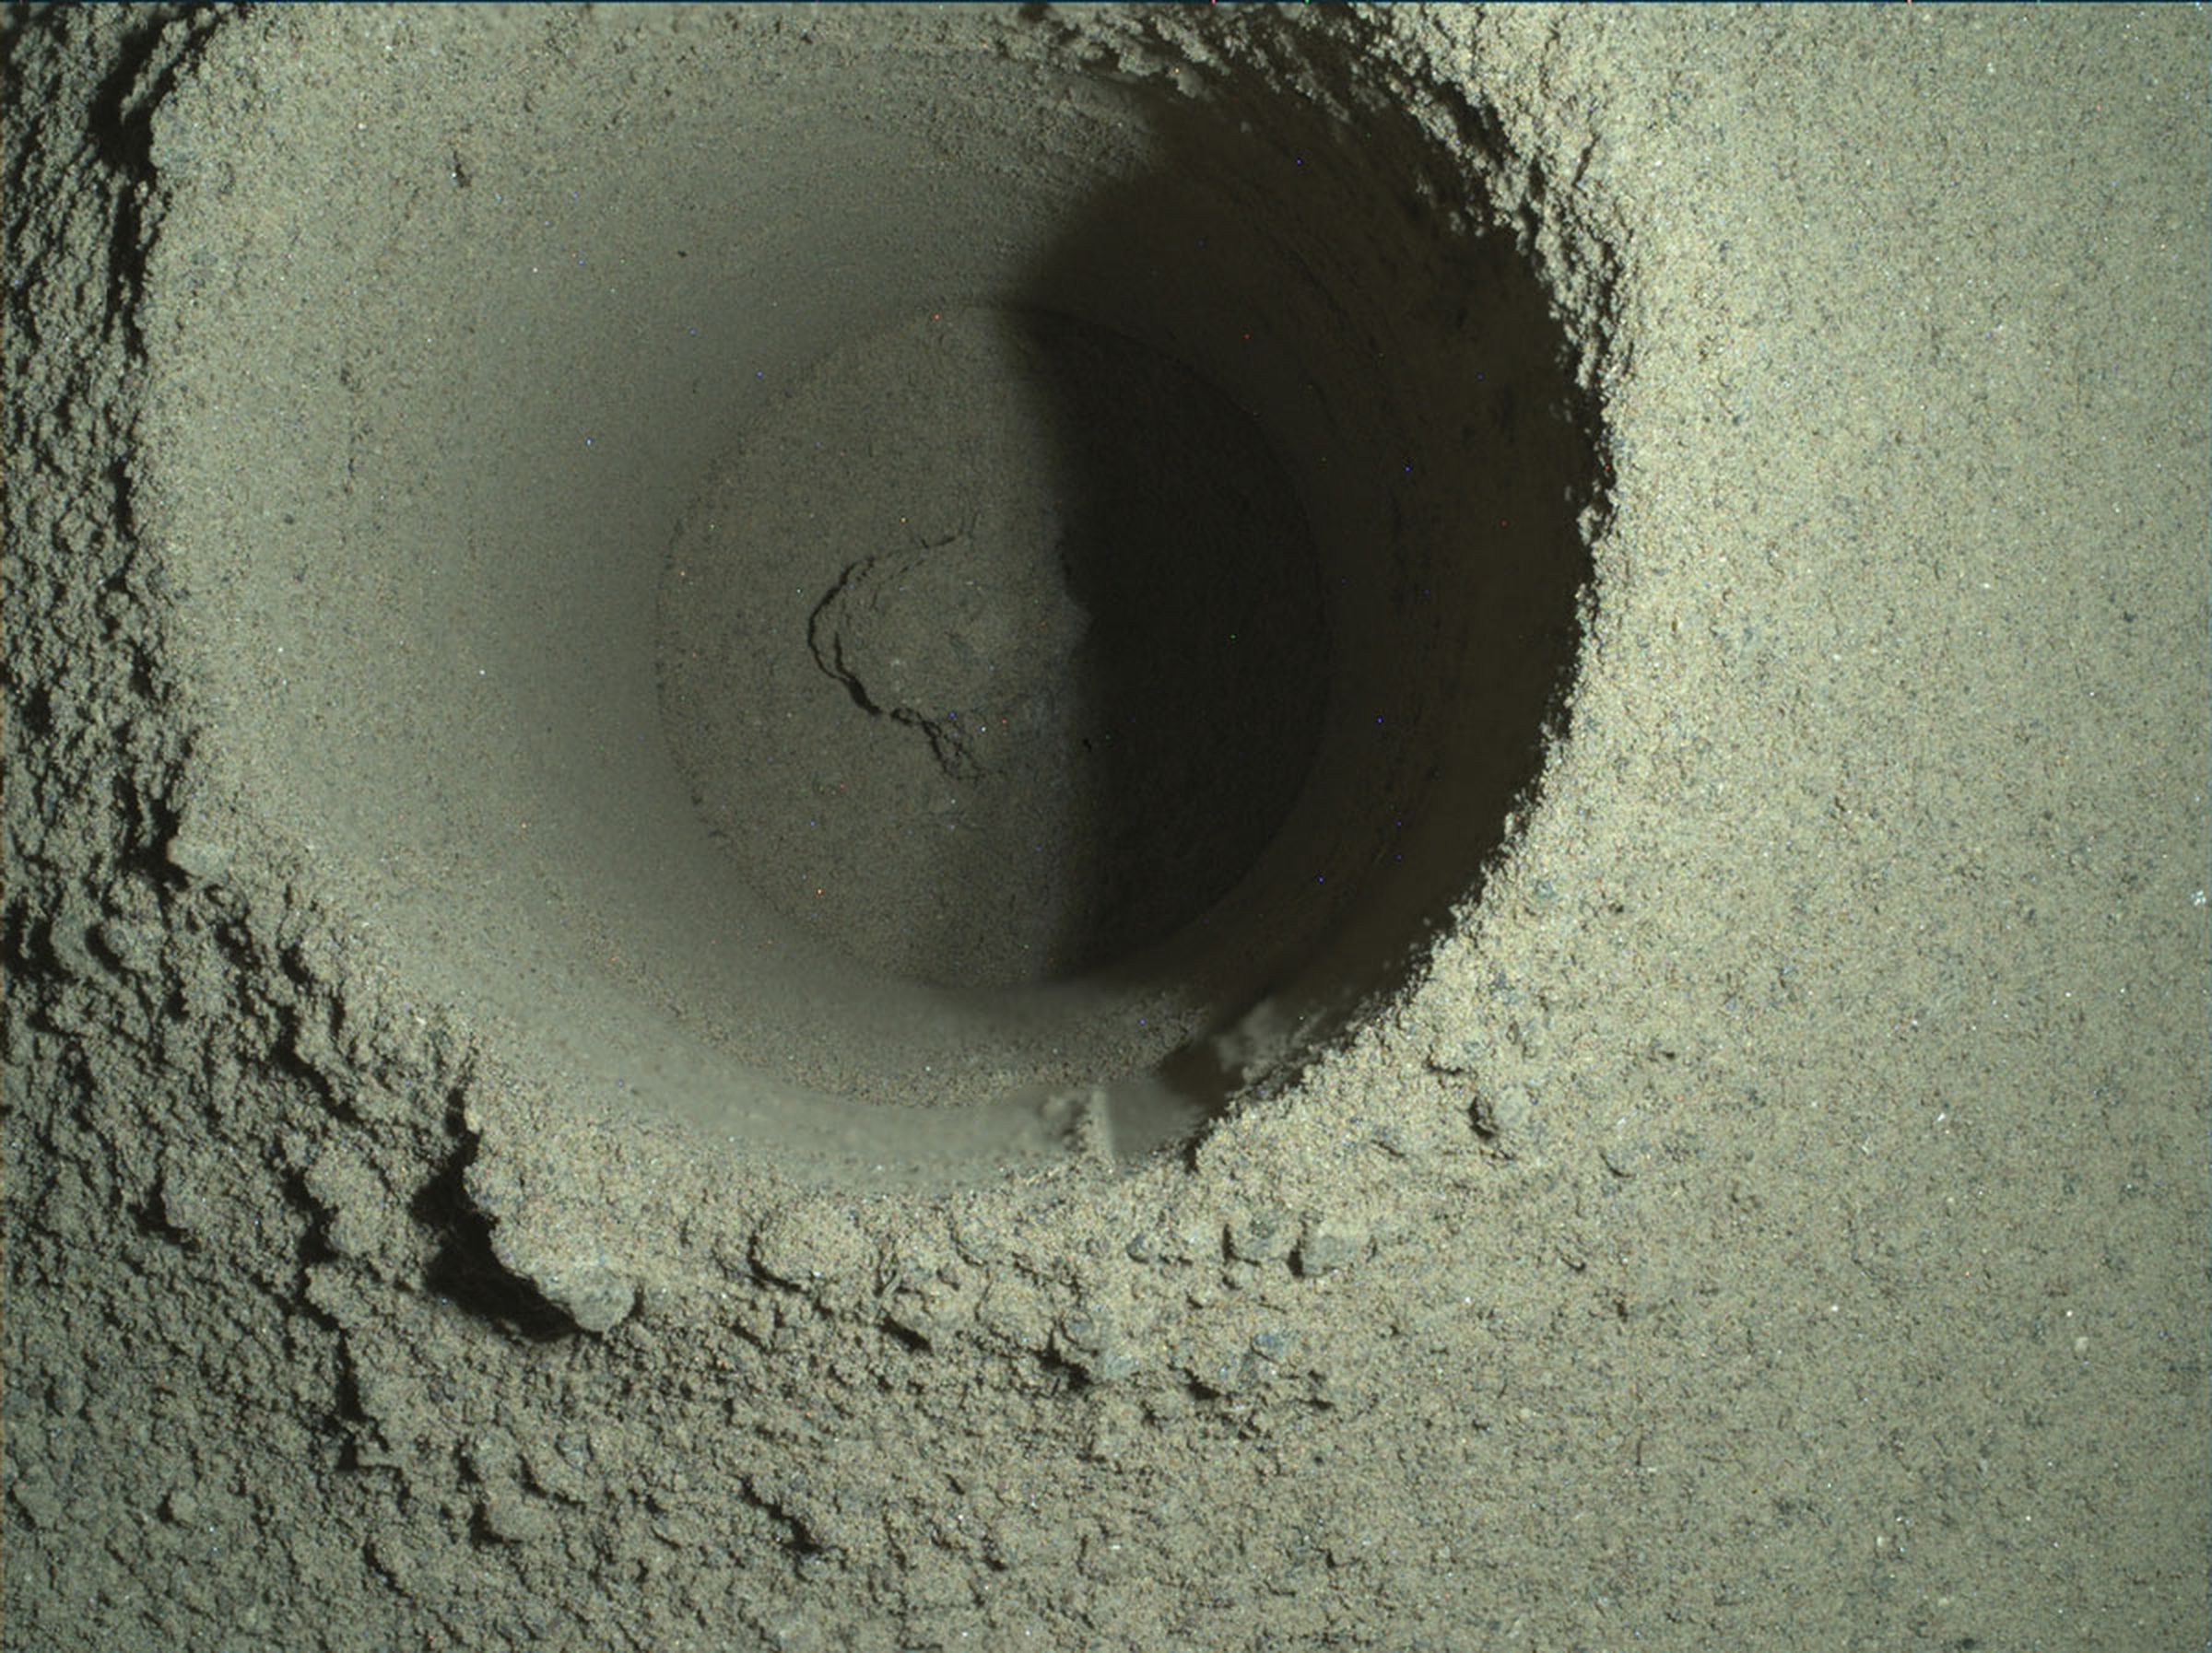 A closeup image of the borehole drilled by Perseverance, showing a mound of dusty material that scientists suspect slipped out of the rover’s drill bit tube.